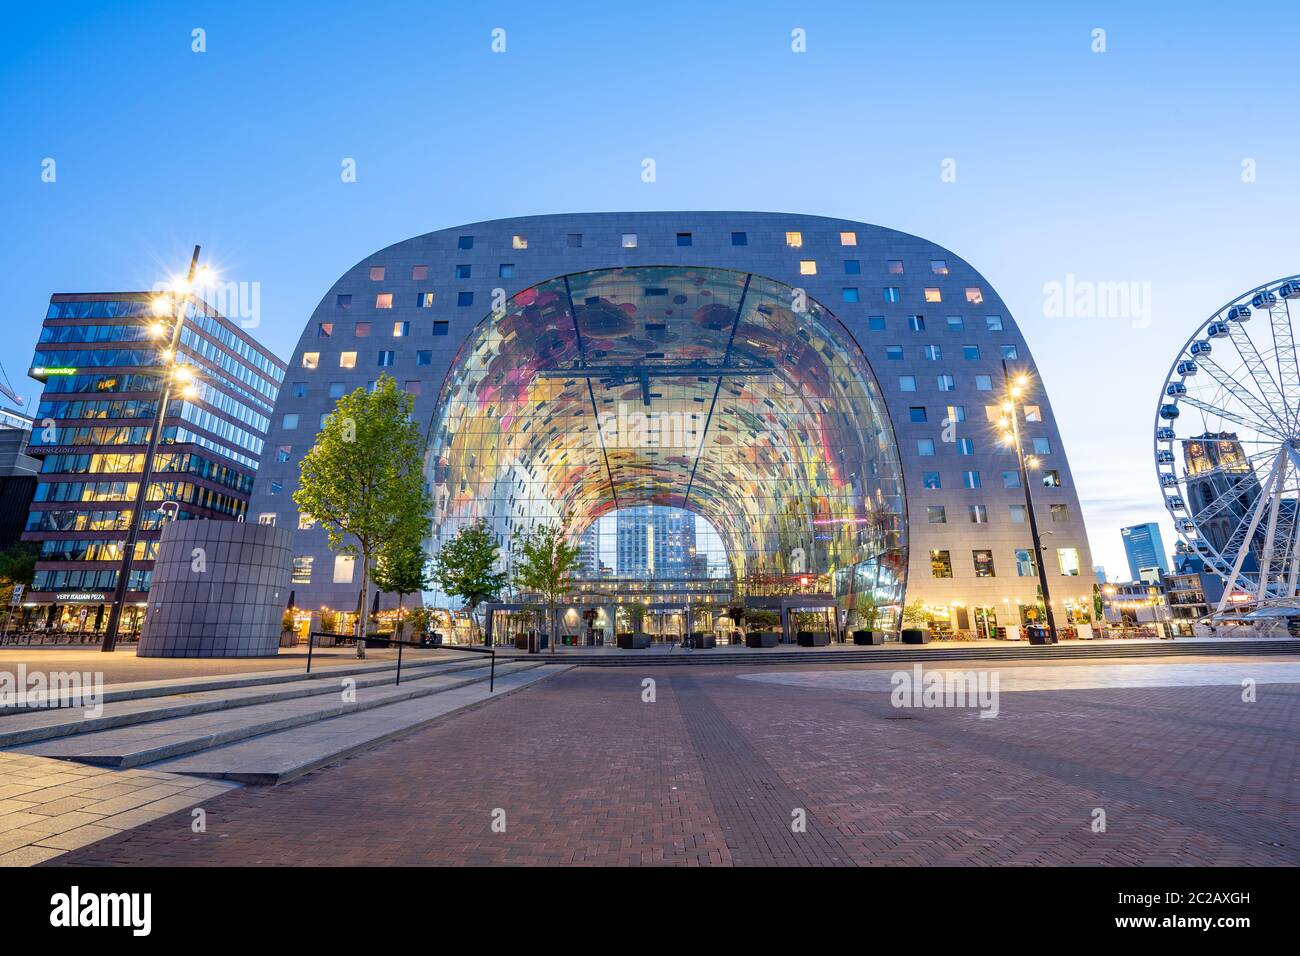 The Markthal at night in Rotterdam city, Netherlands. Stock Photo